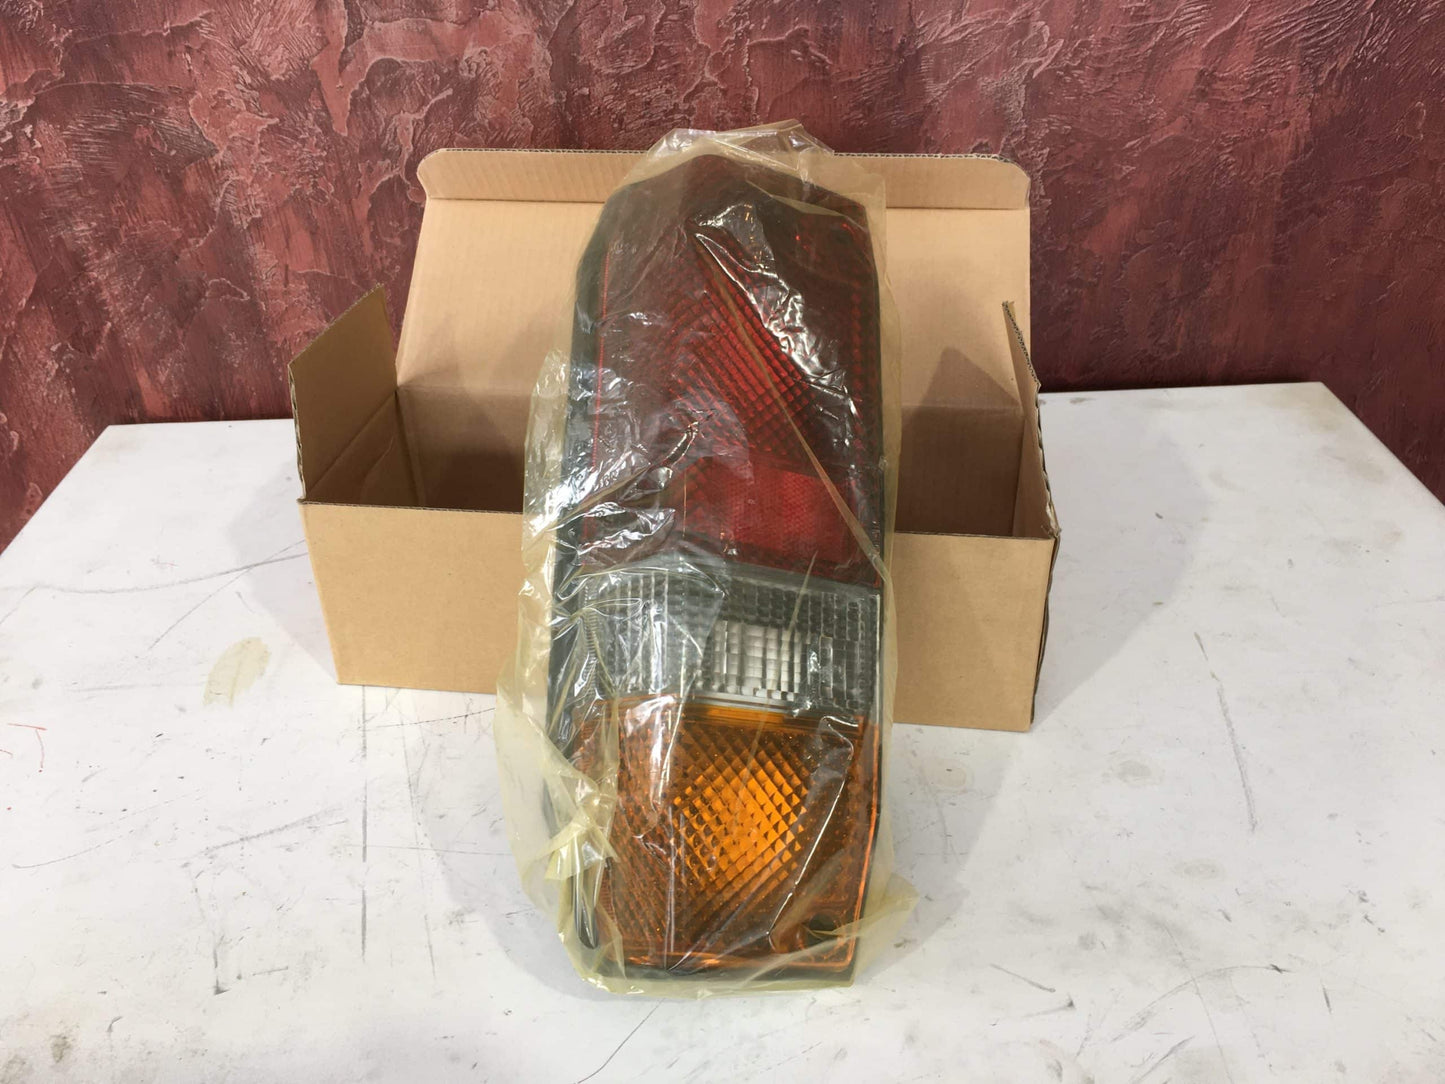 NOS Taillight Assembly / Left / 70 Series Land Cruiser